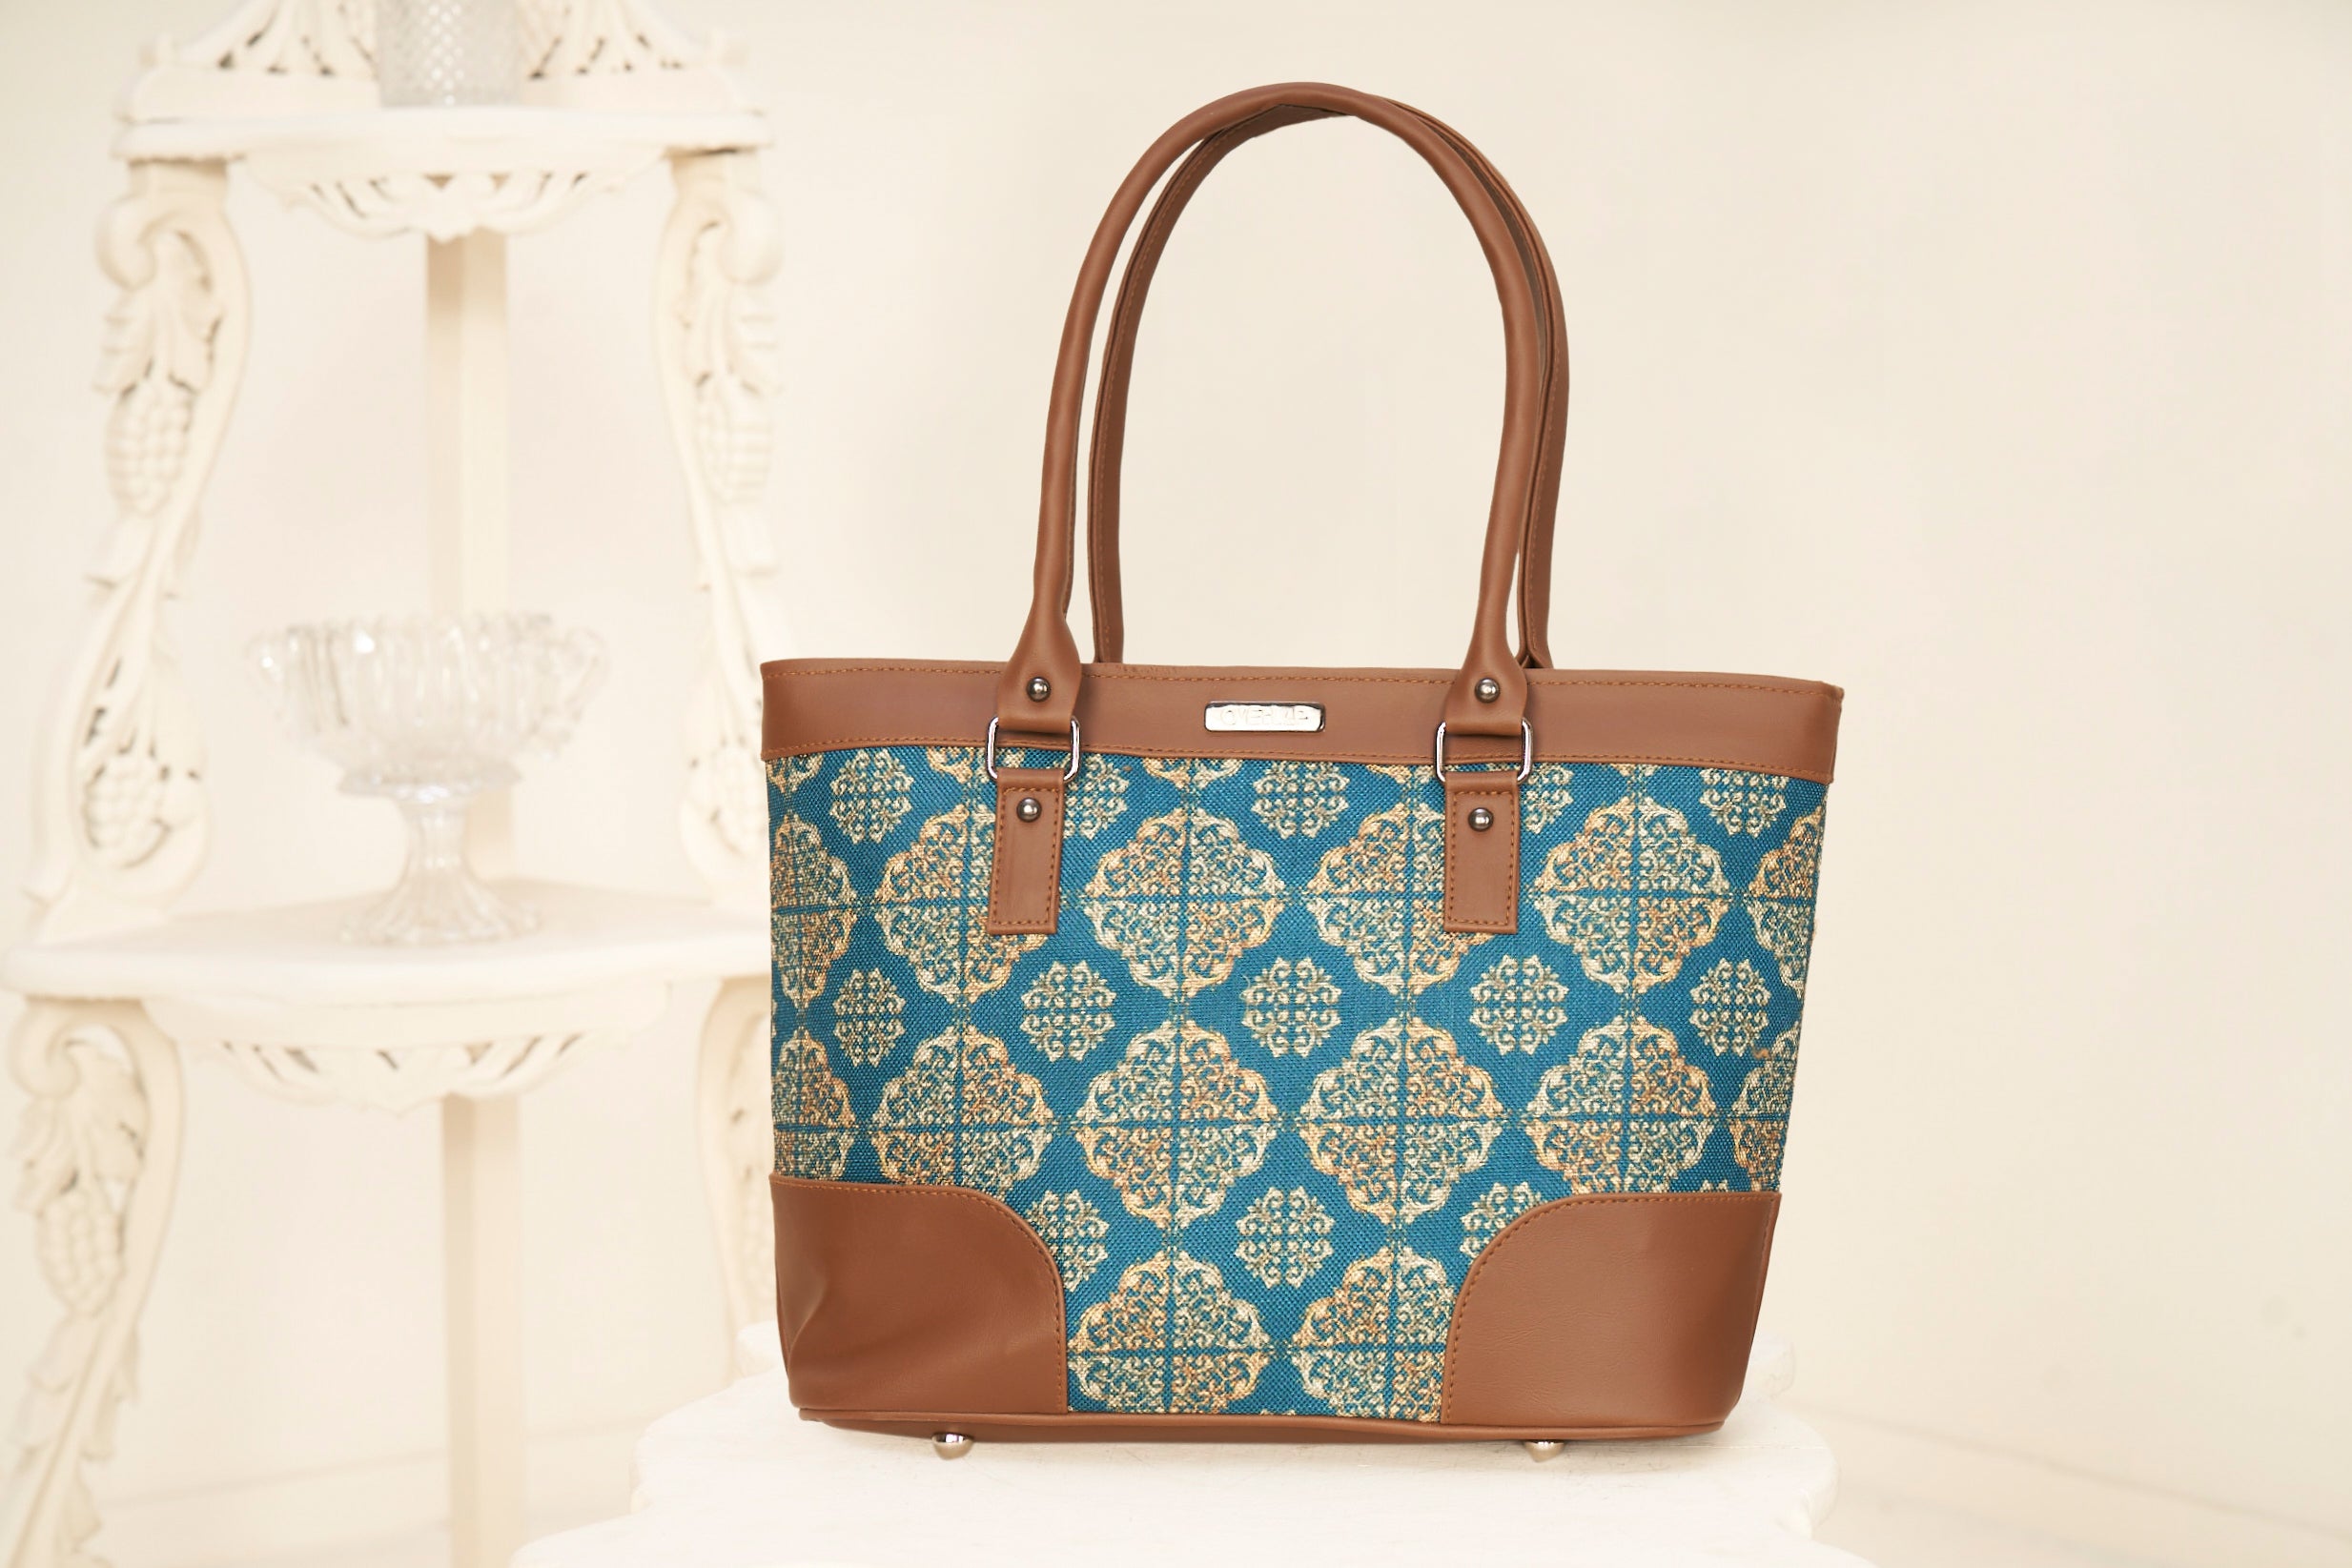 Artistic Utility: Aora 003 - Printed PolyCotton Canvas Tote, Your Everyday Essential